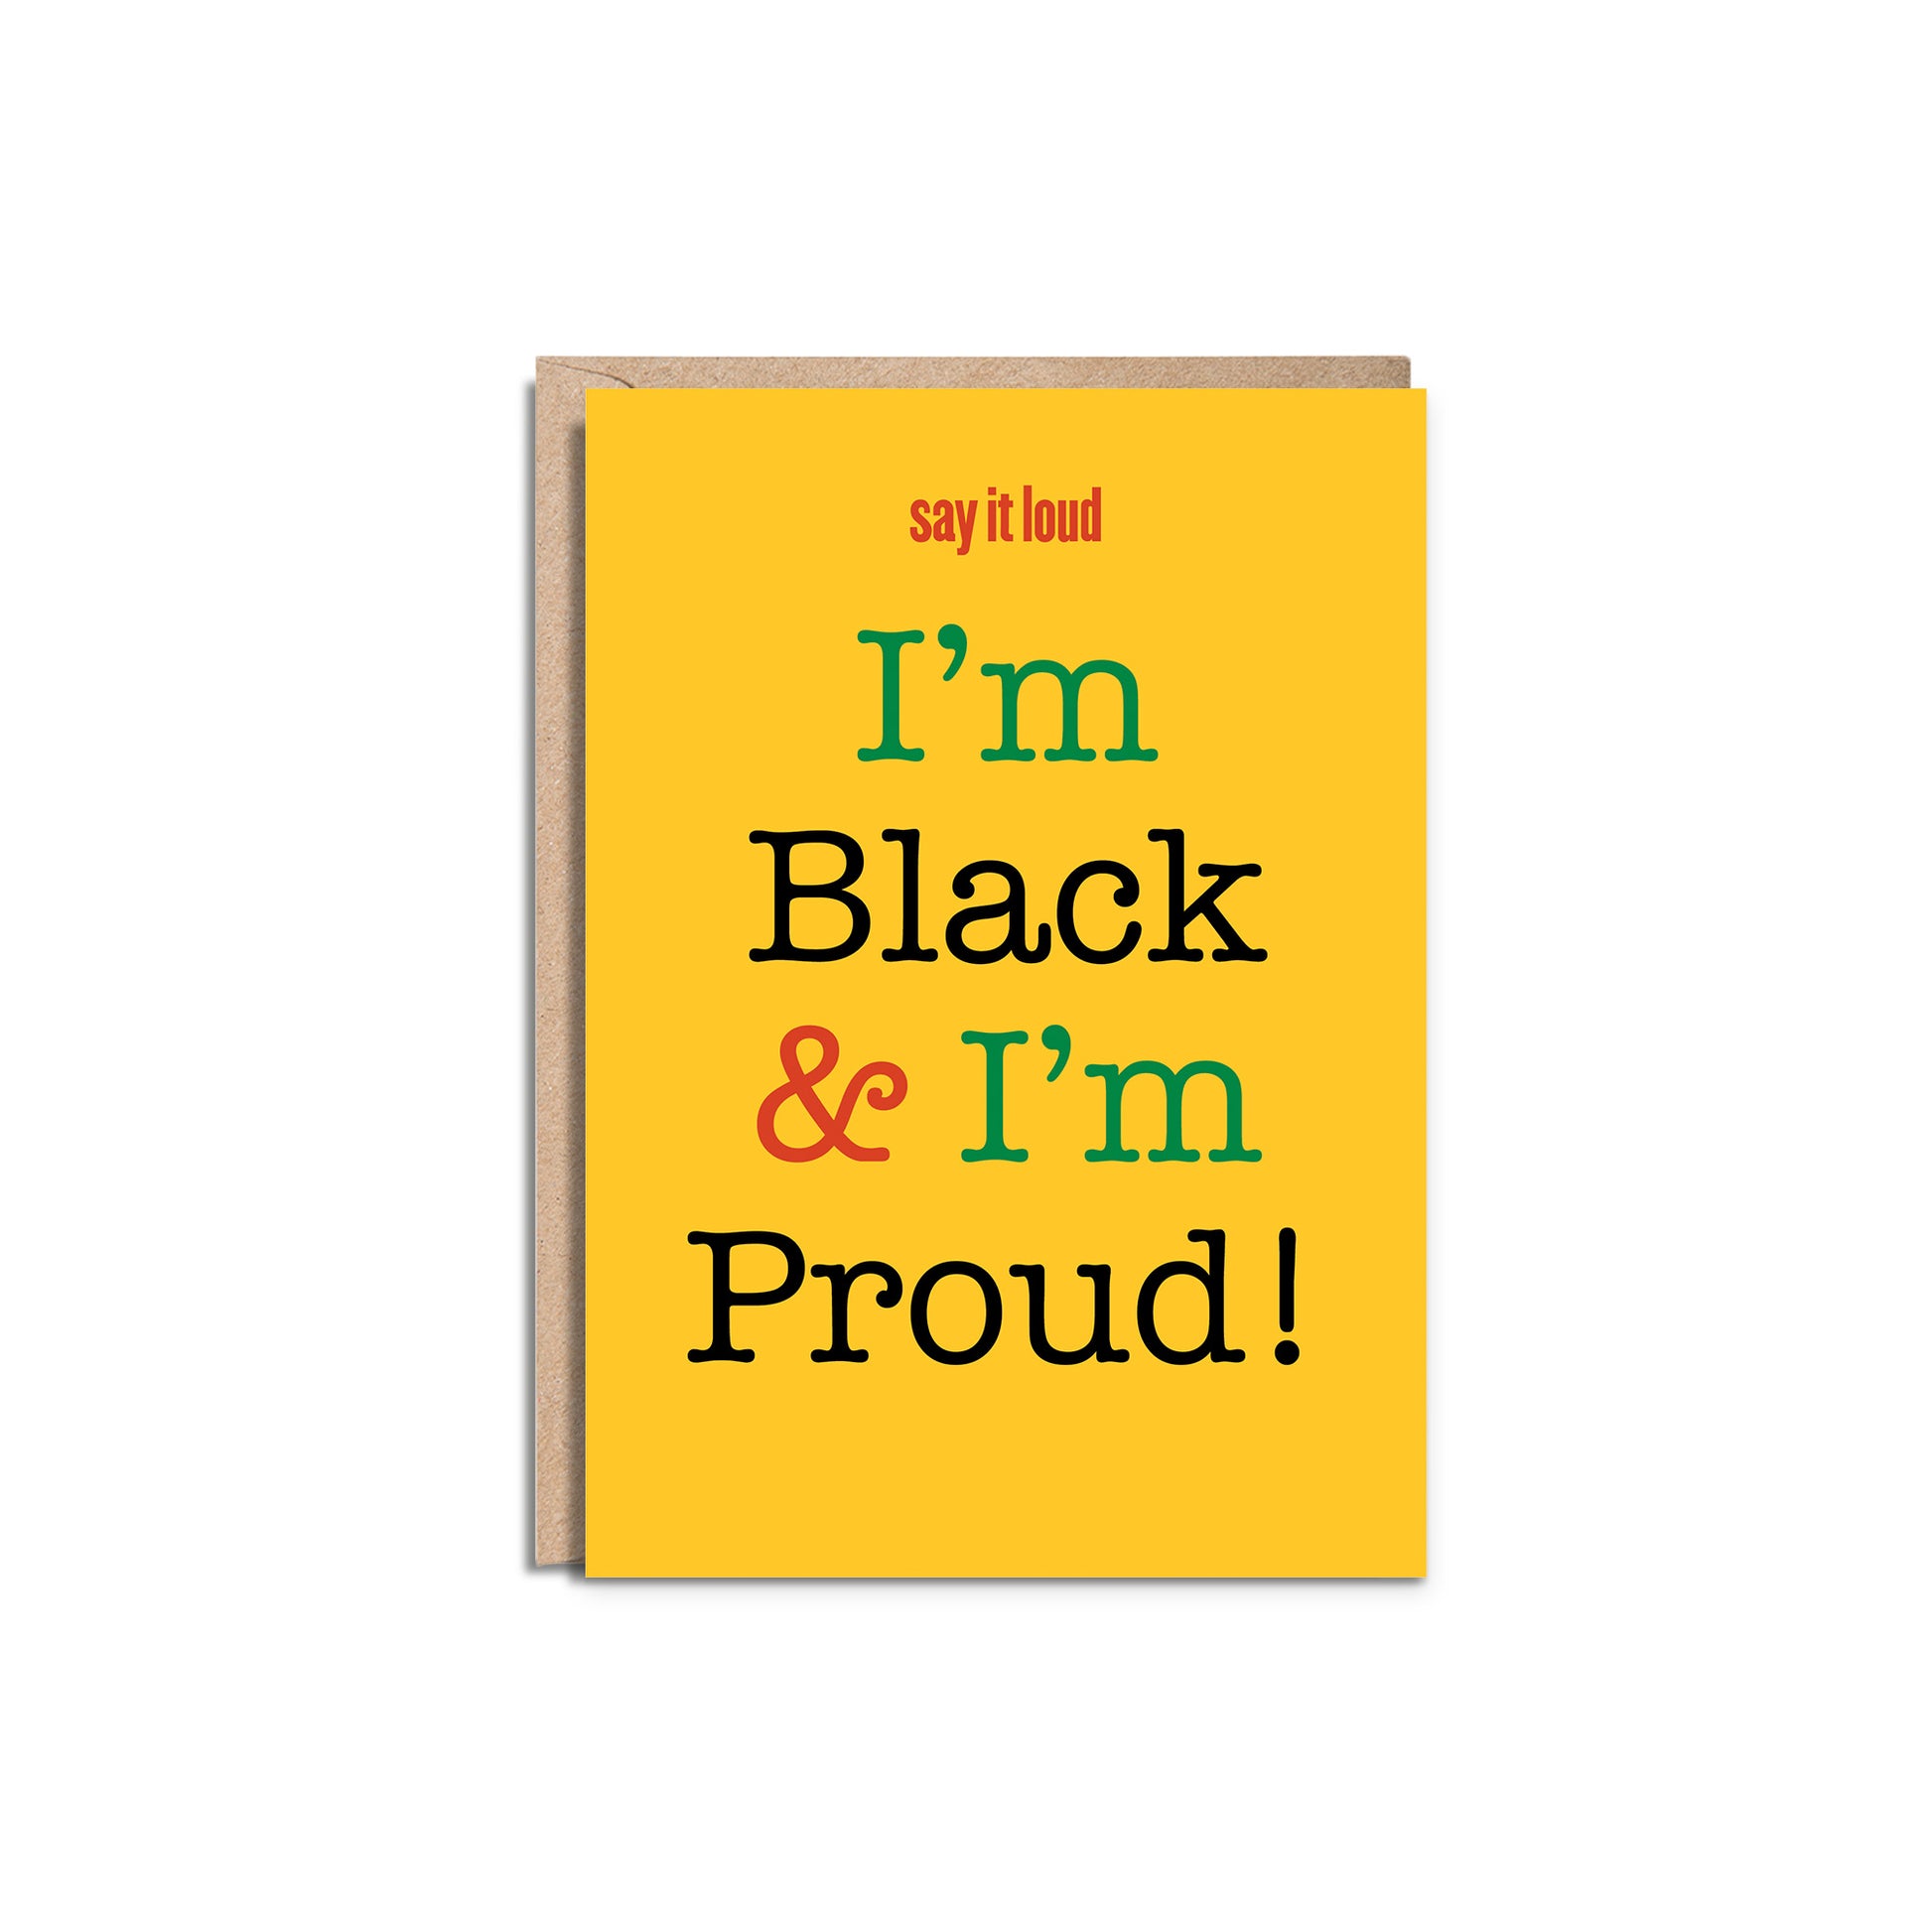 Buy Black and Proud 5x7” Black History Month, African American Pride greeting card from Goods Made By Digitrillnana, Ashley Fletcher. Black Woman Owned. Perfect card for any ocasion!